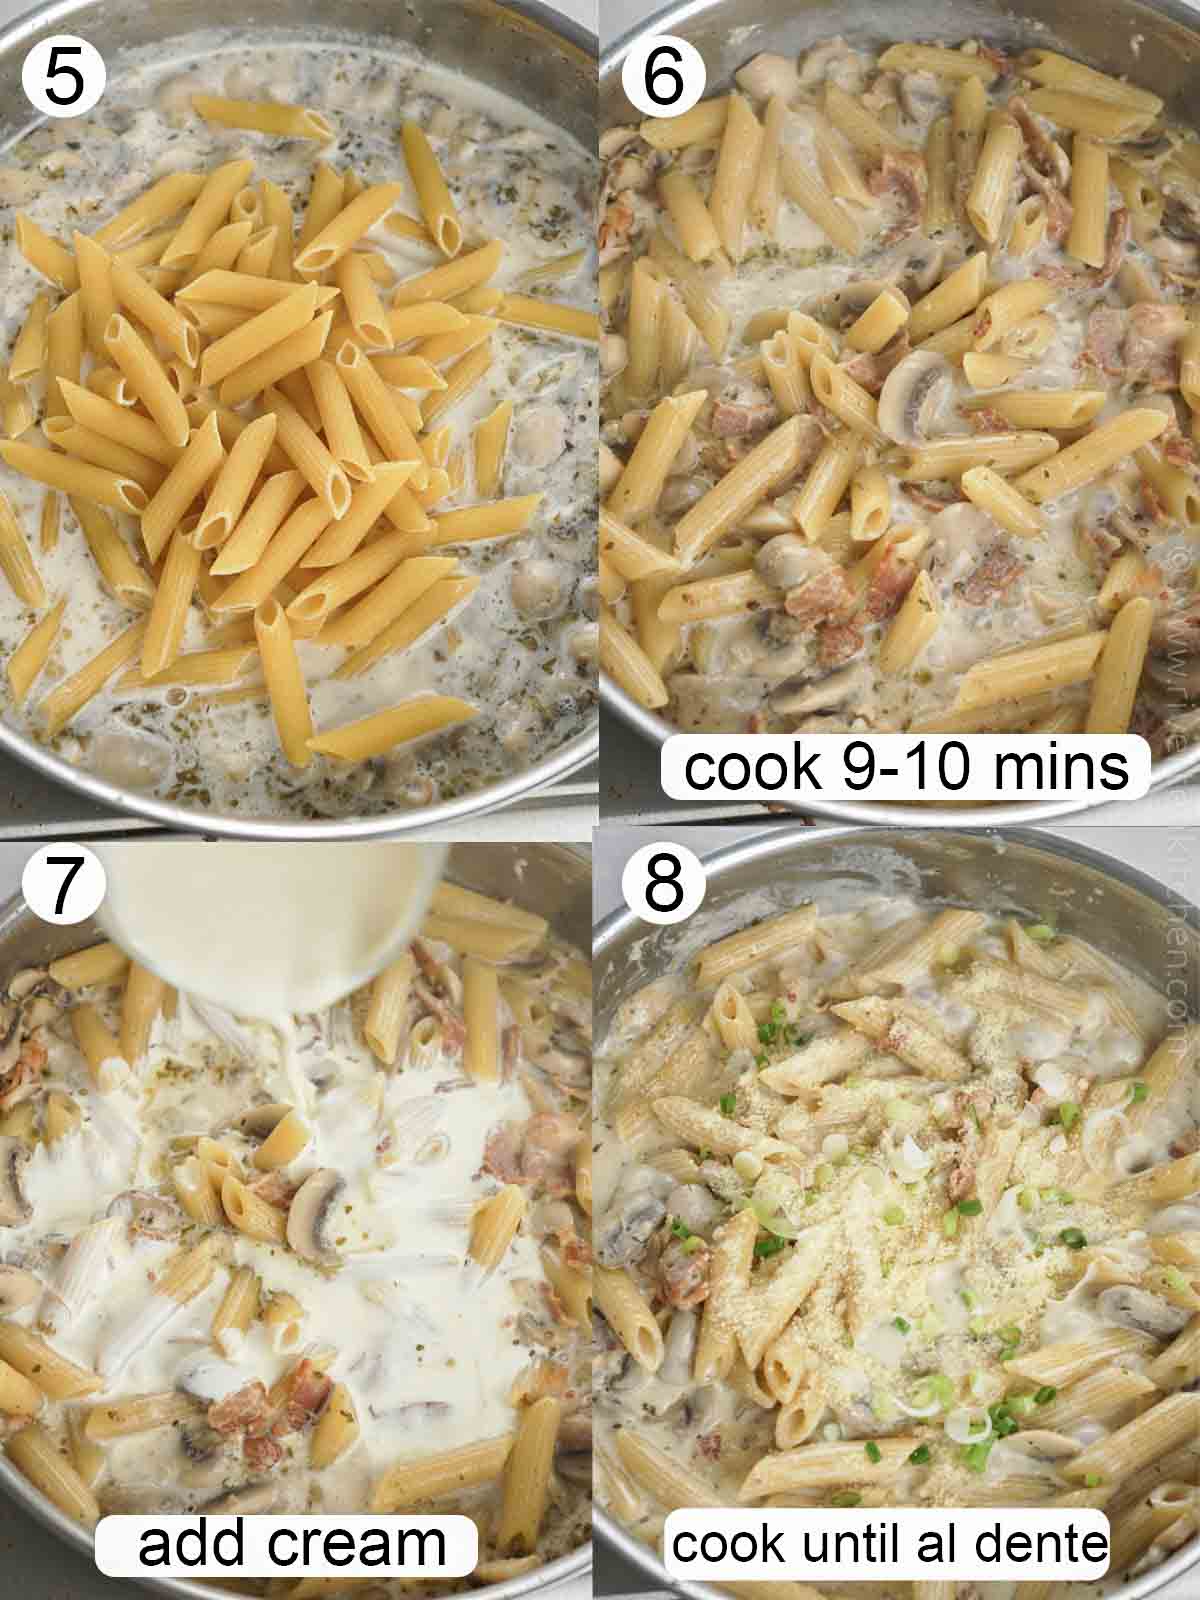 step-by-step process on how to make creamy garlic pasta in one pot.